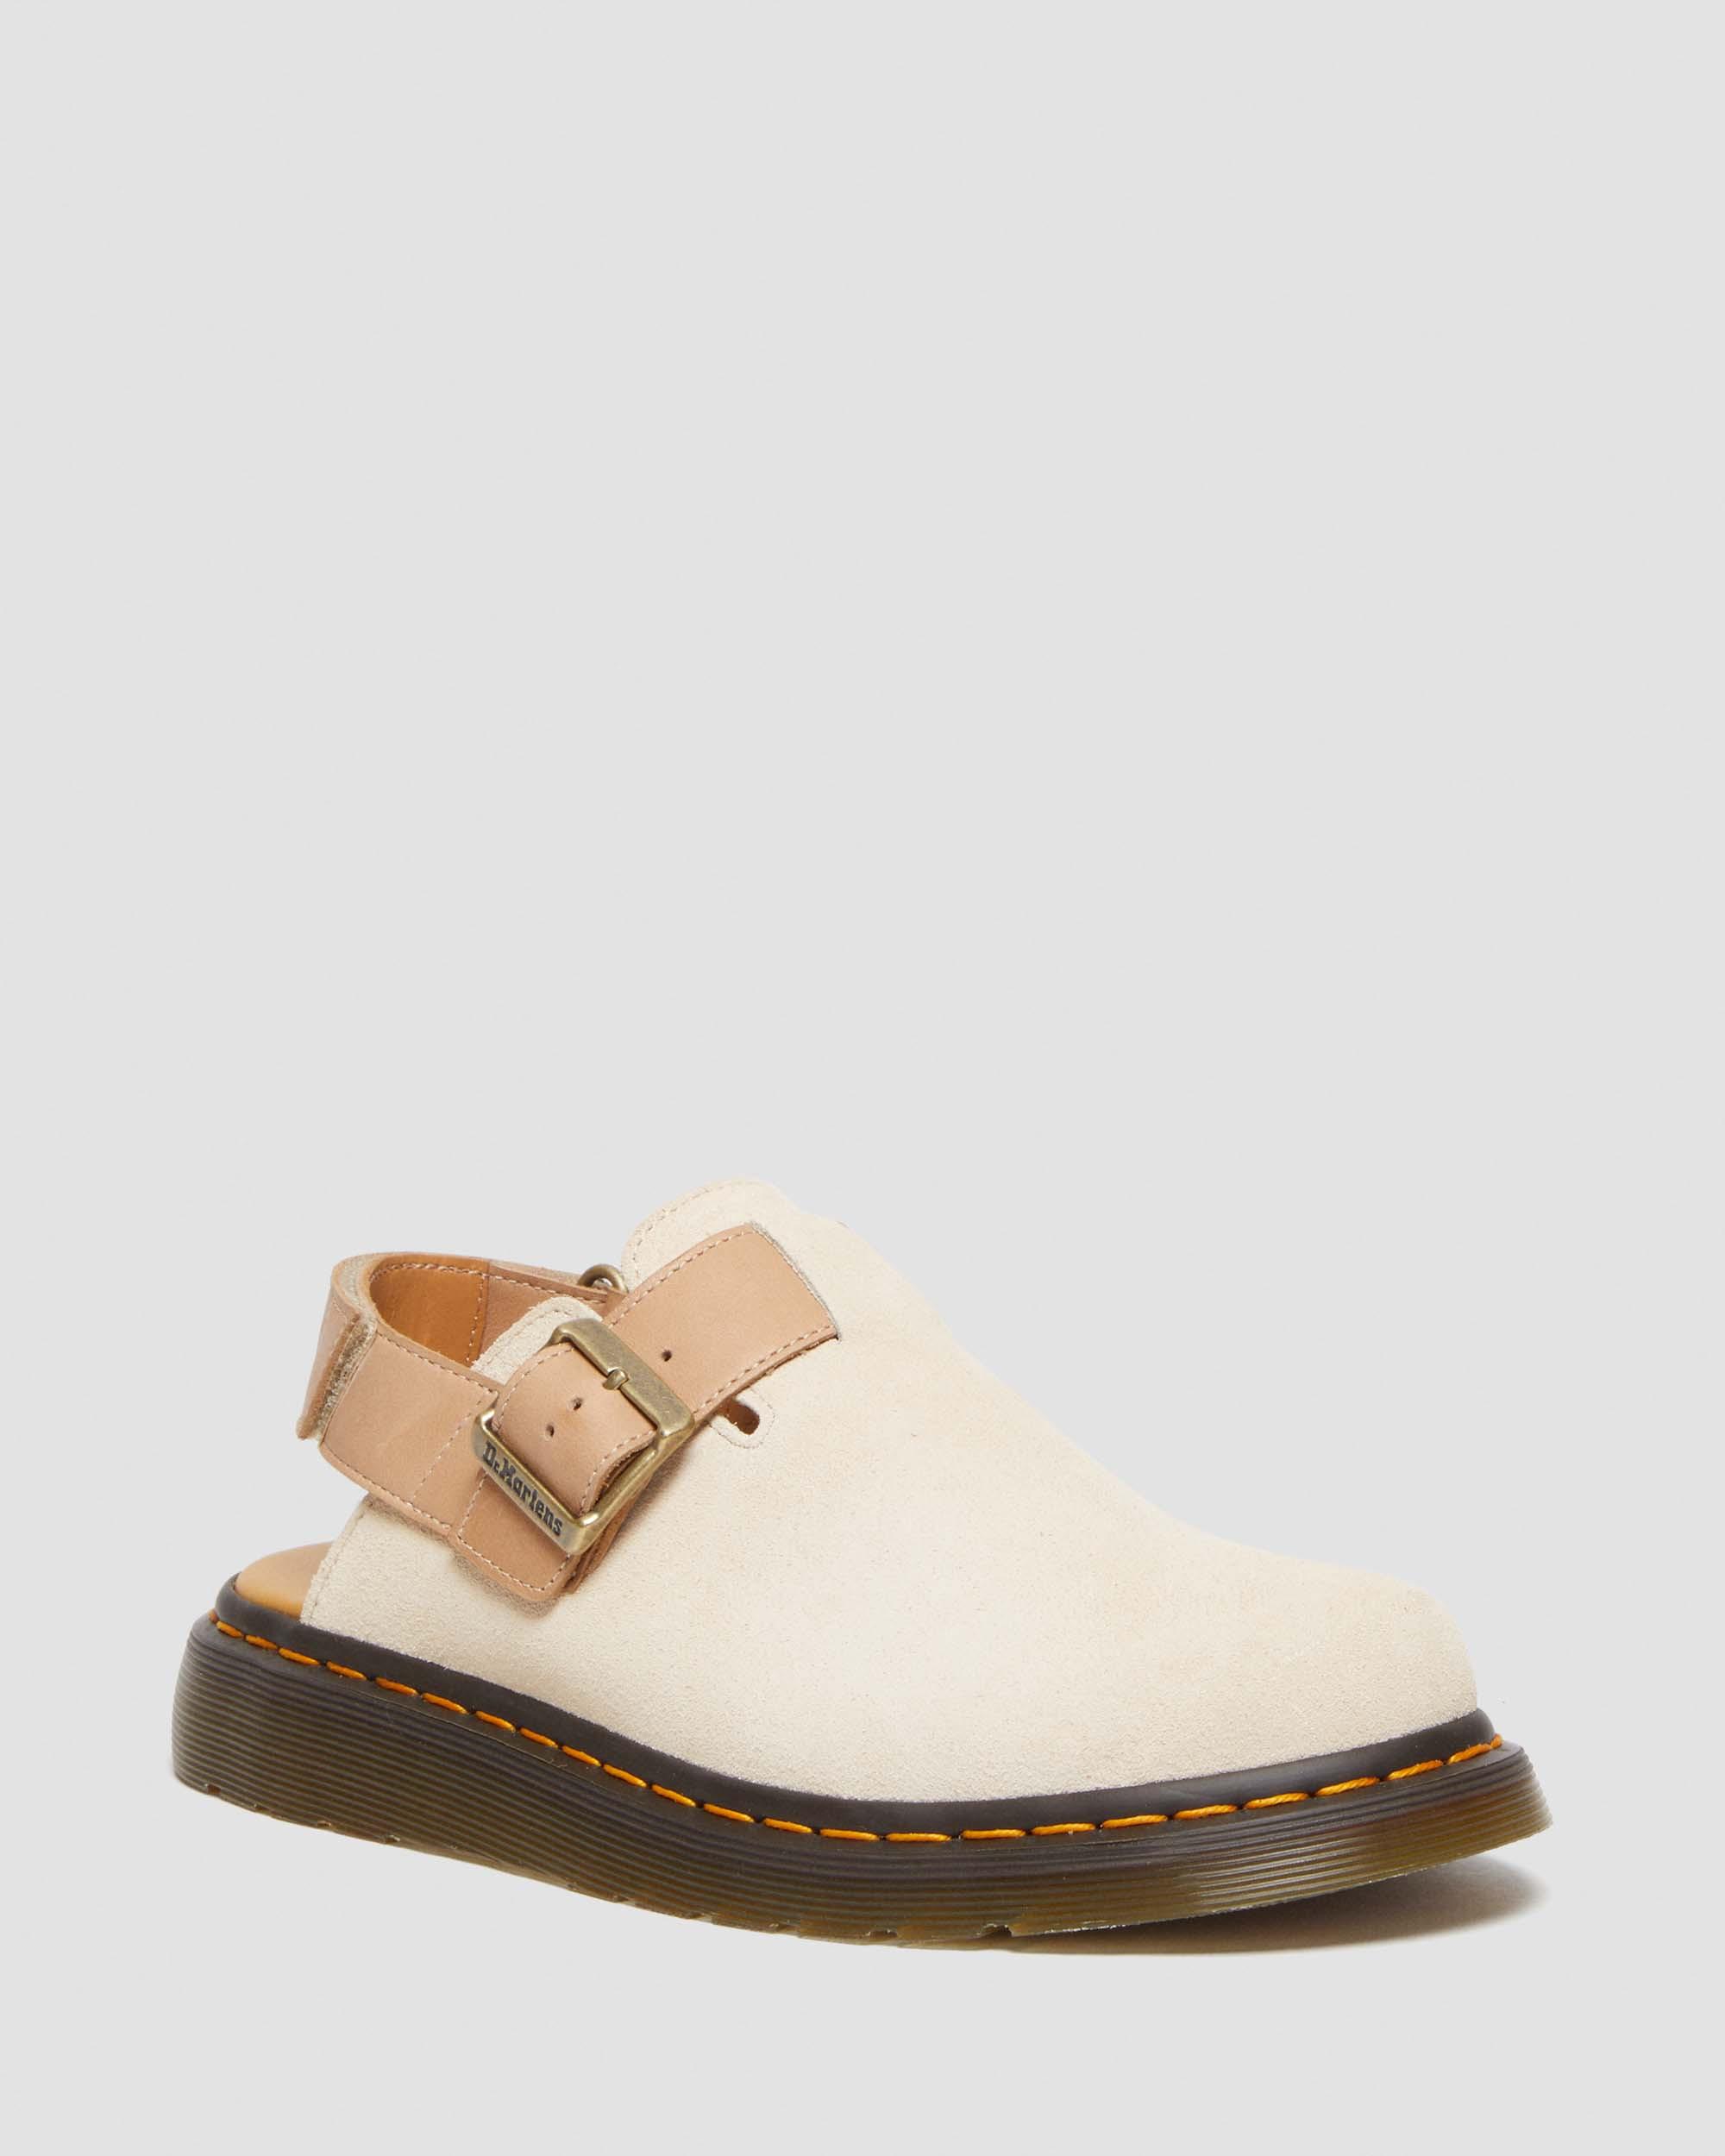 Jorge II Suede & Leather Slingback Mules in Parchment Beige | Dr. Martens